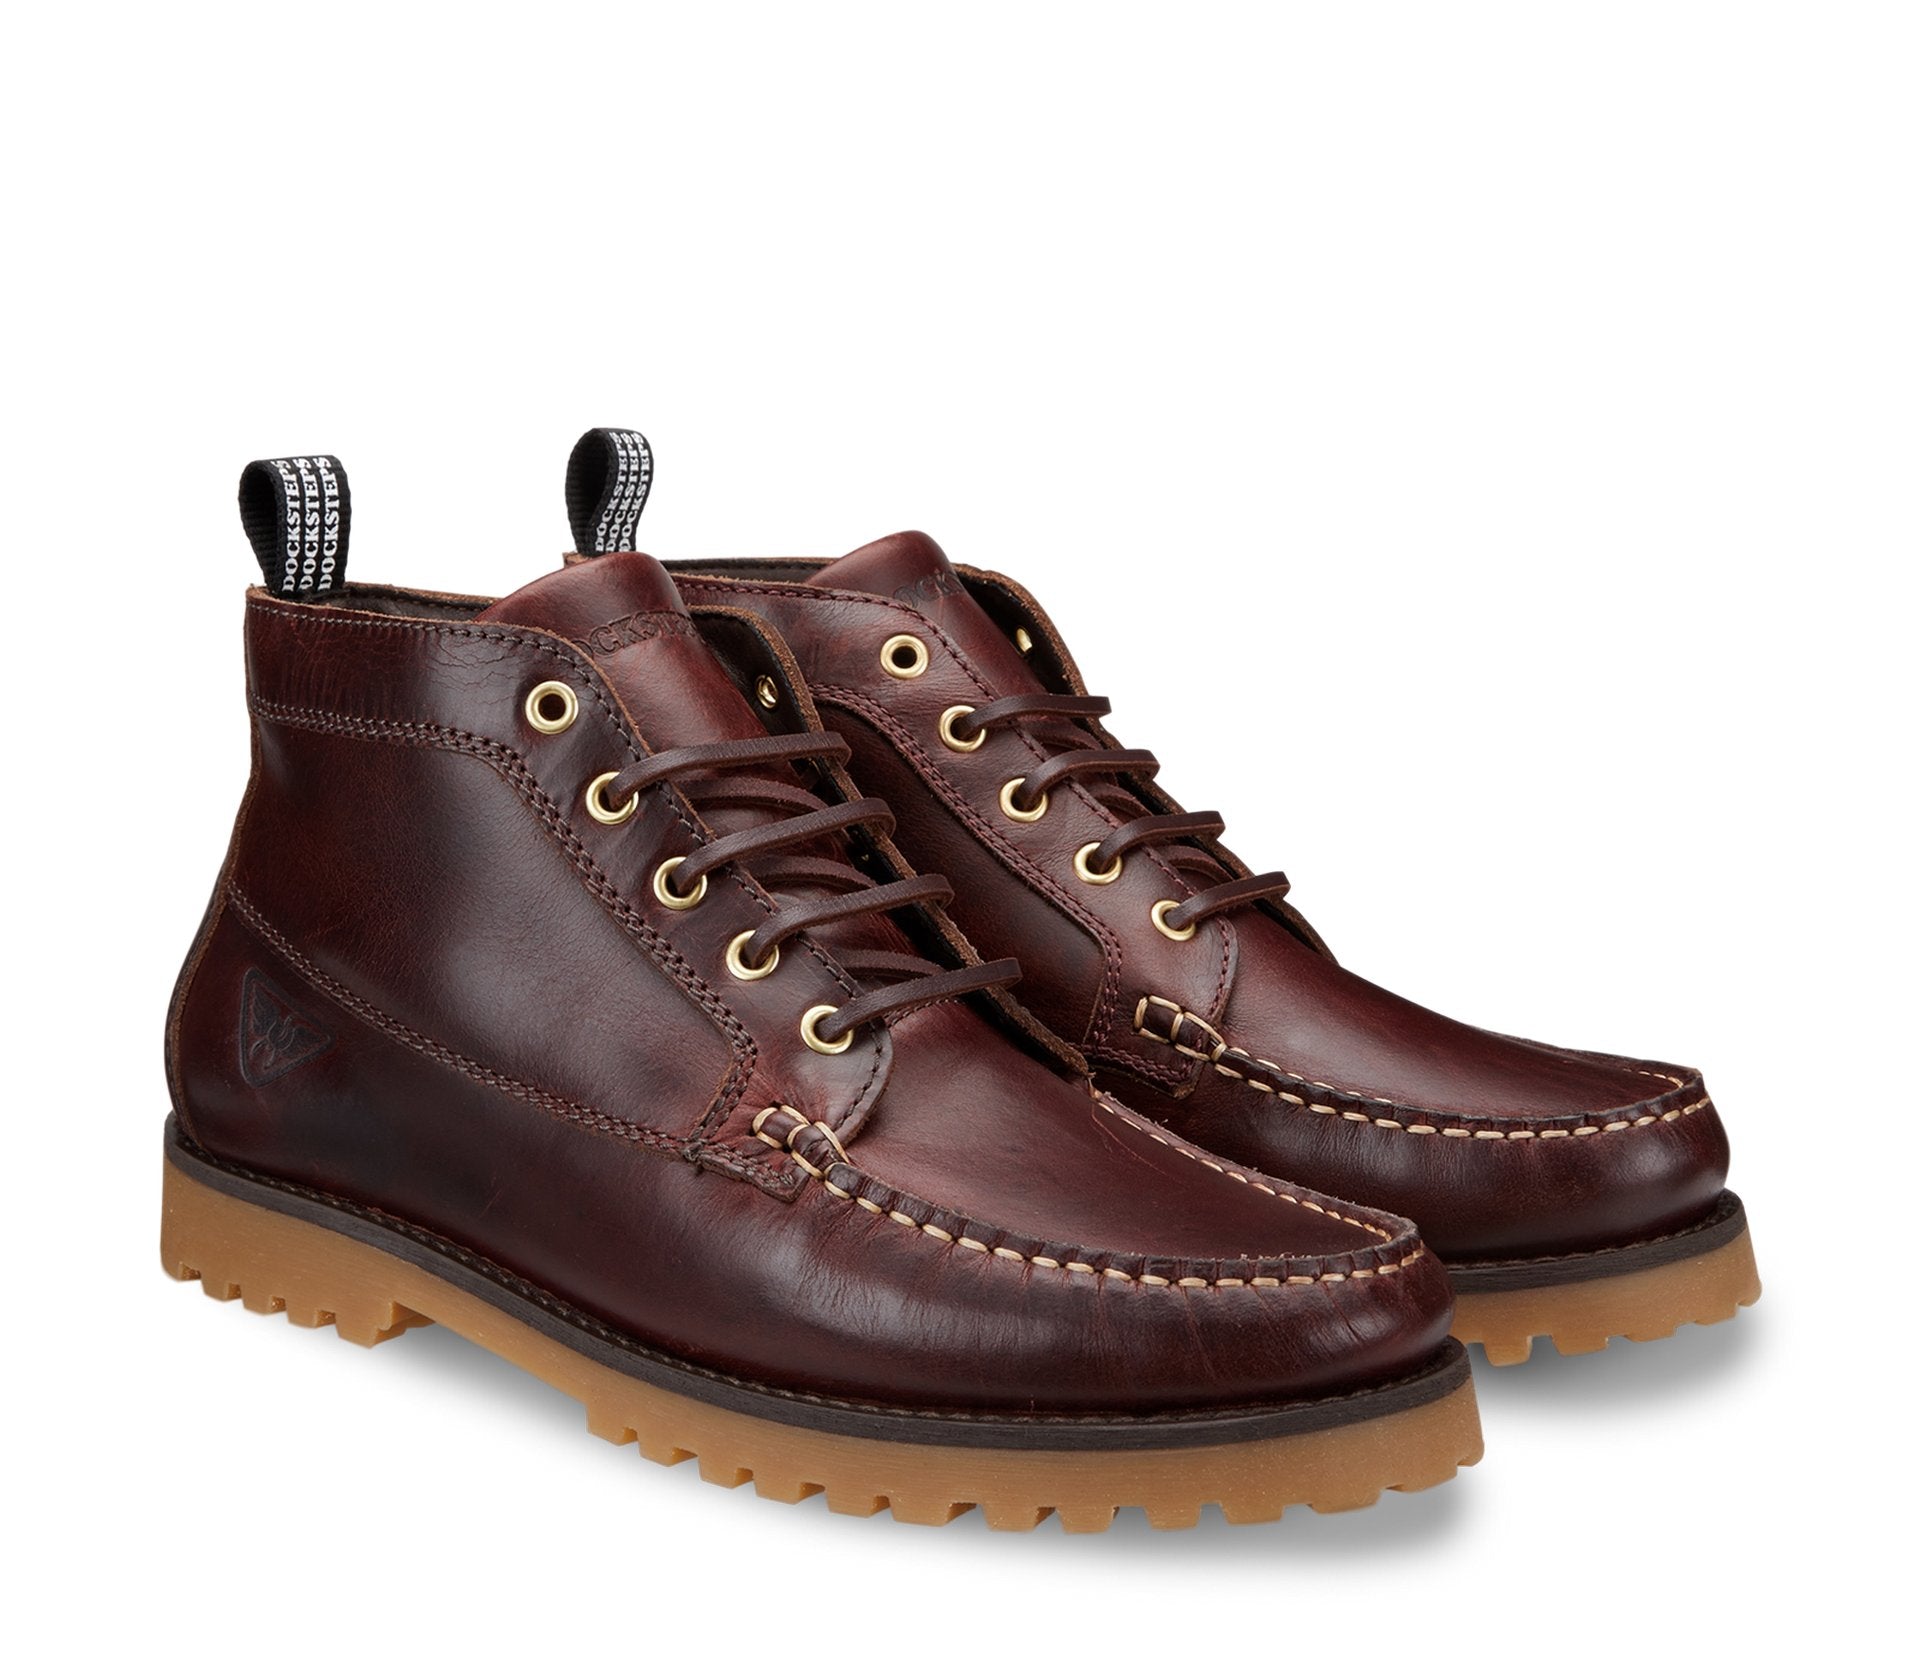 Men's brown lace-up boot